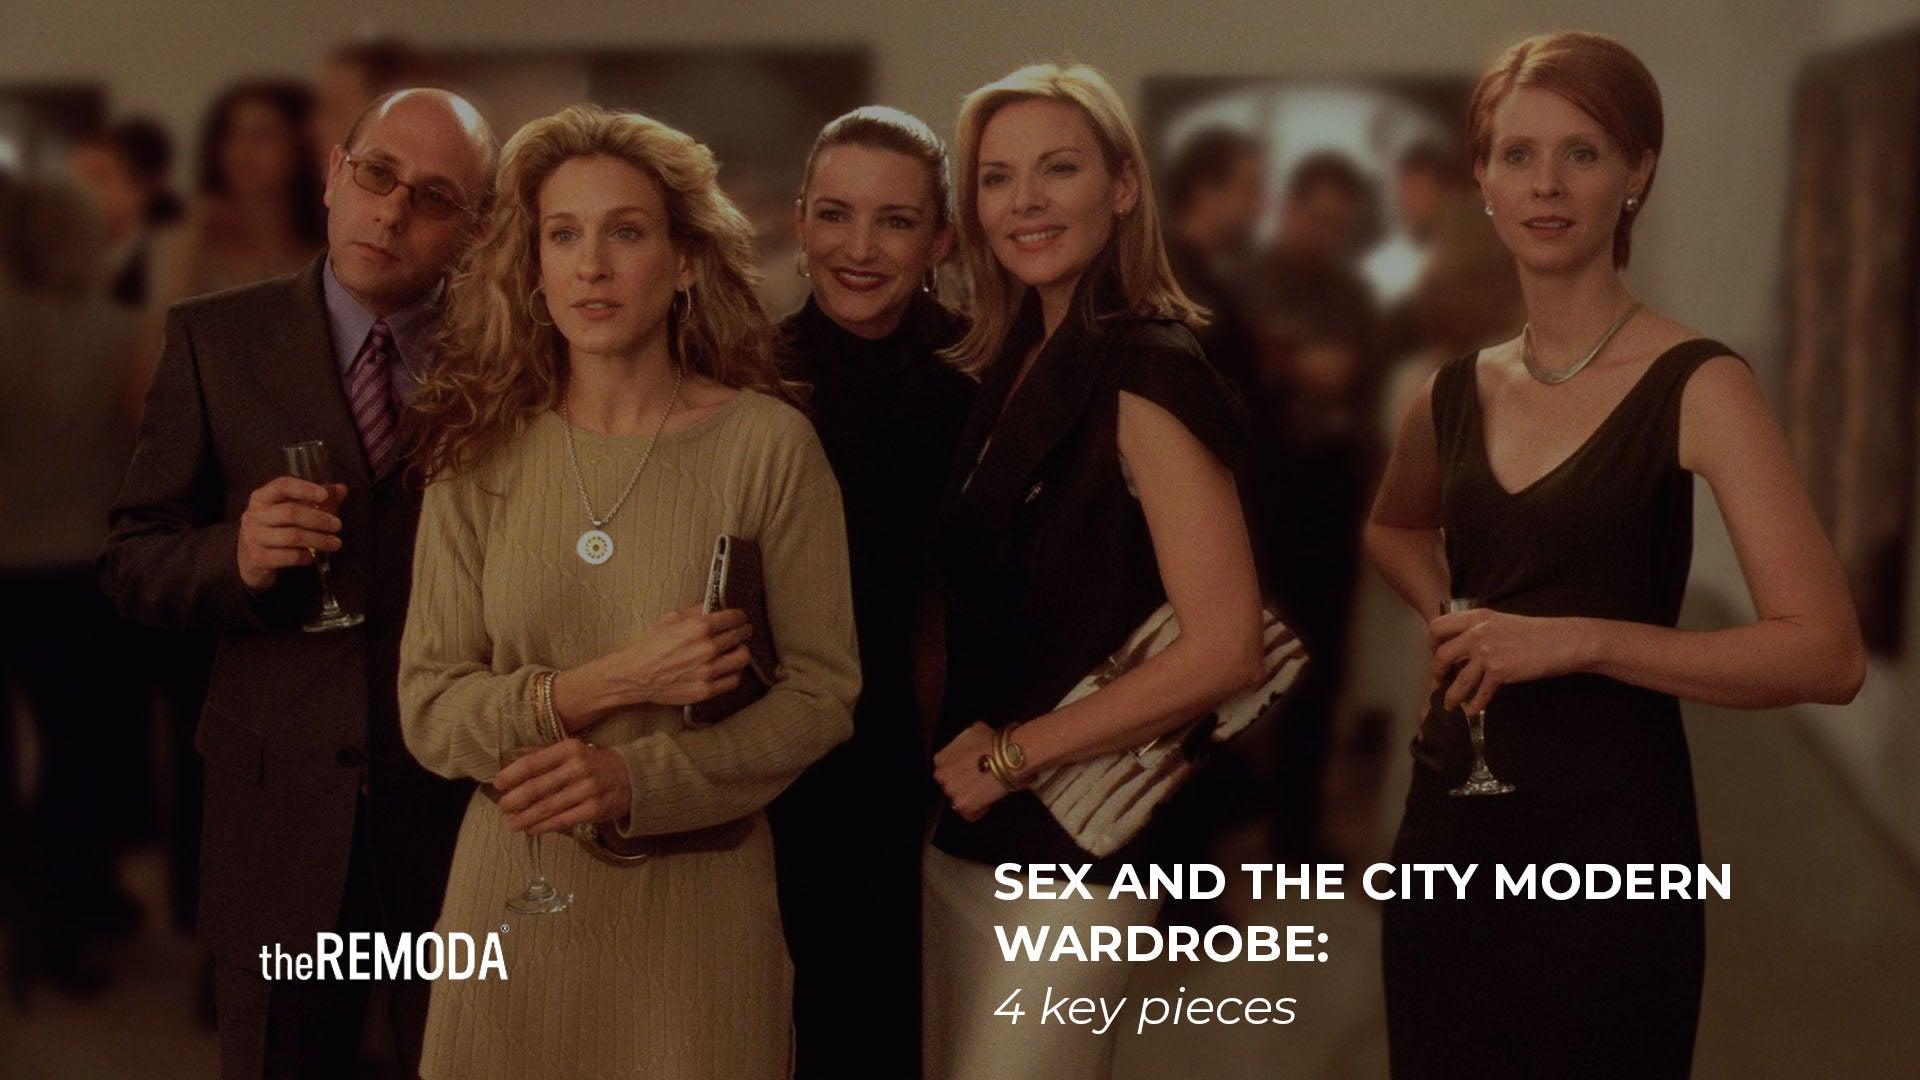 Sex and the City modern wardrobe: 4 key pieces - theREMODA